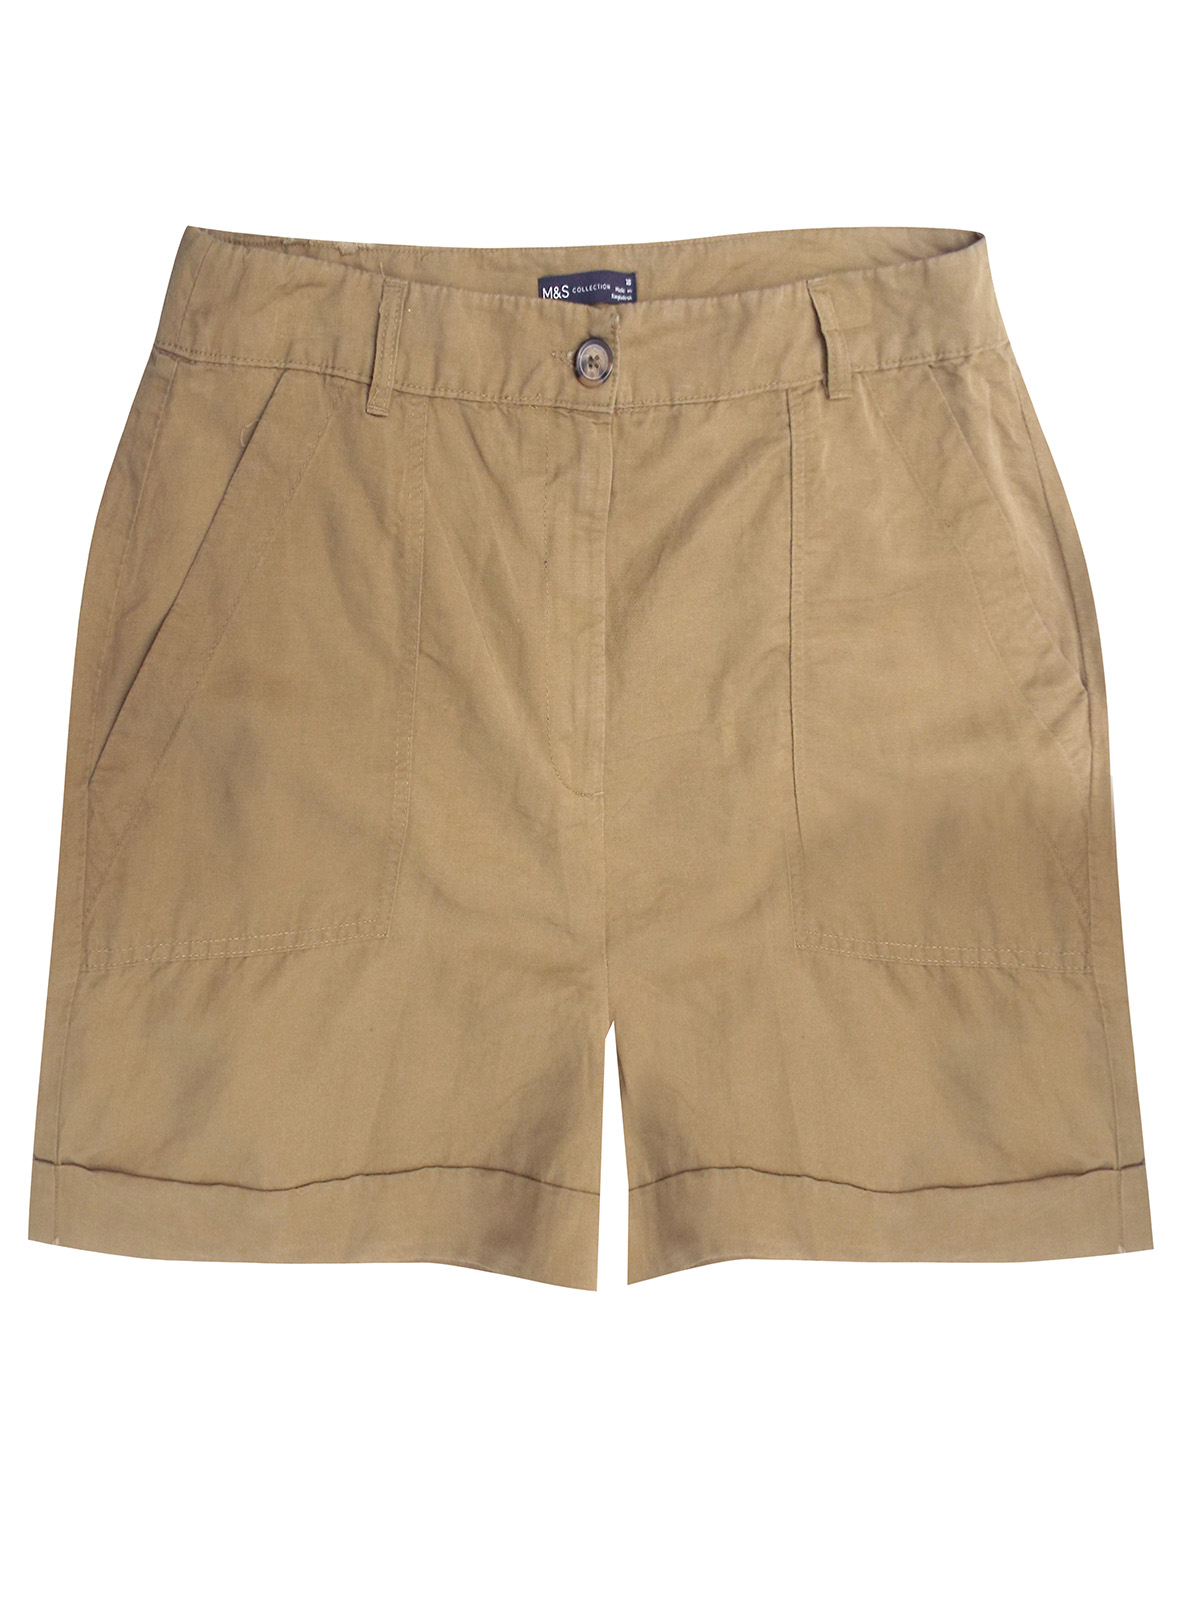 Marks and Spencer - - M&5 NATURAL Linen Blend Shorts - Plus Size 18 to 24